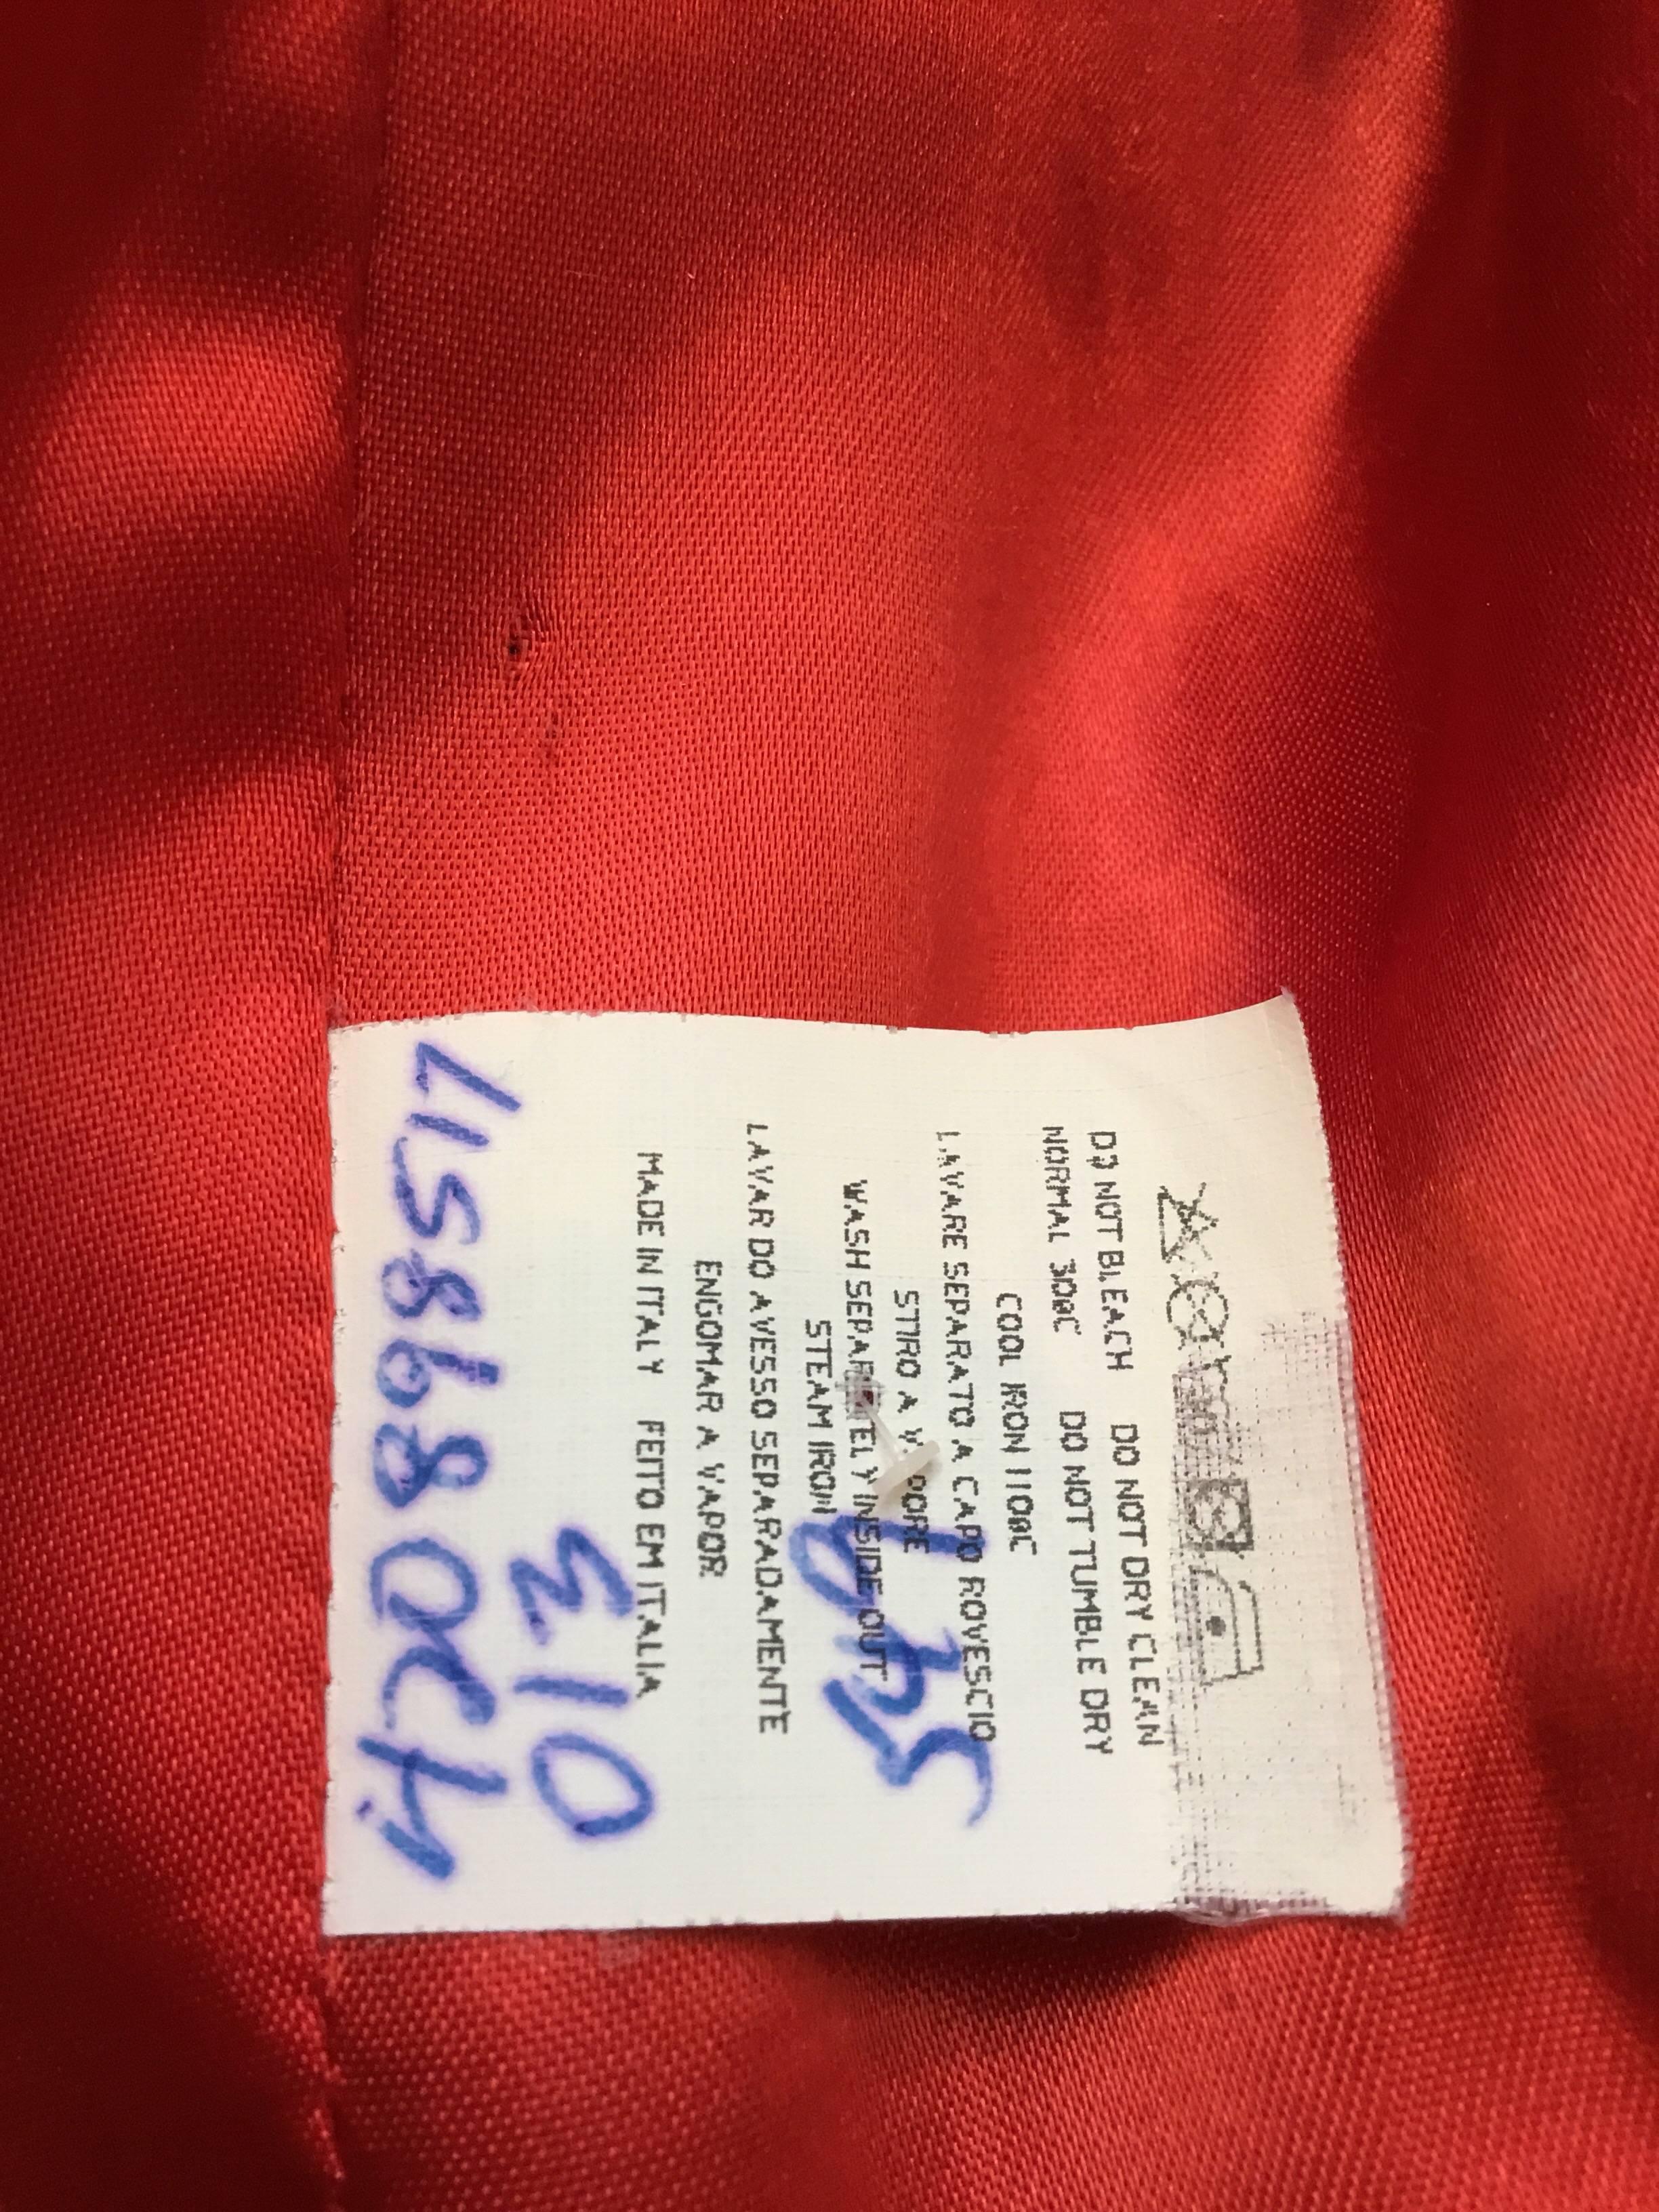 Voyage Passion Embellished Denim Jacket In Excellent Condition For Sale In Carmel, CA